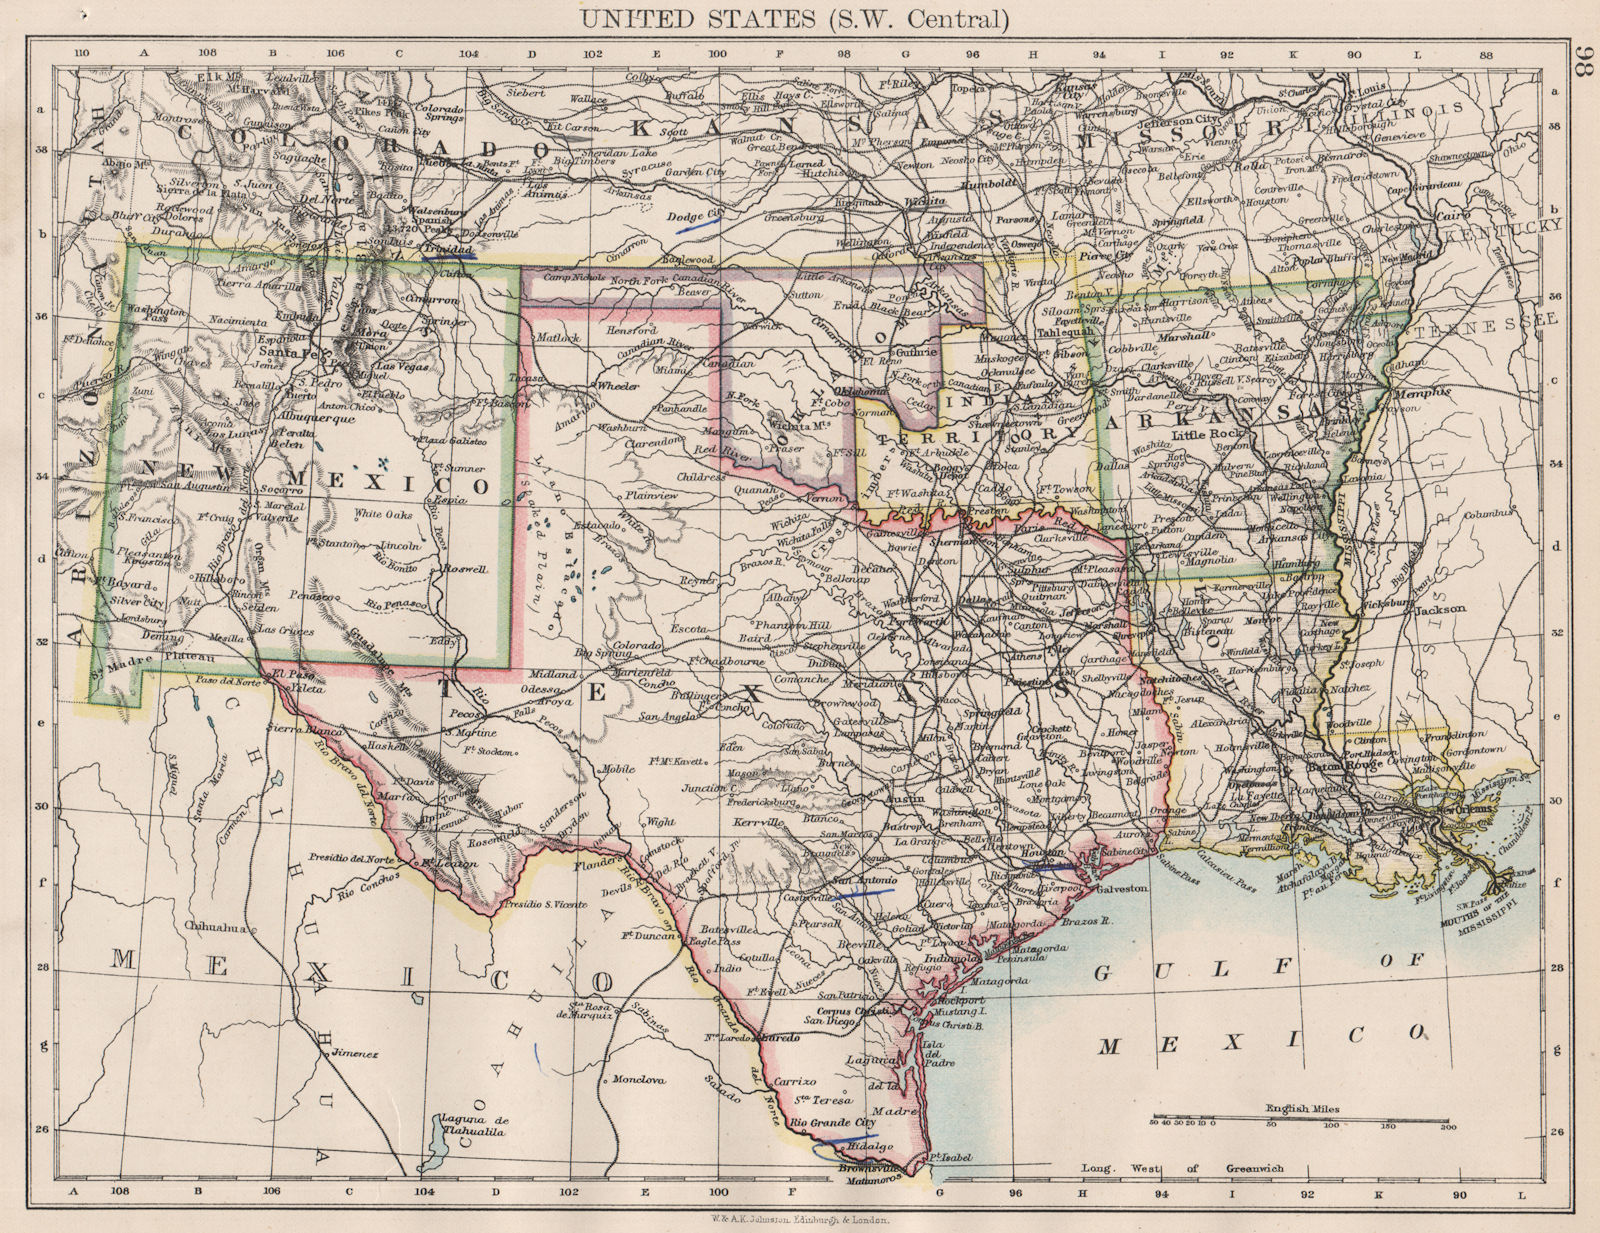 USA SOUTH CENTRAL. Texas "Indian Territory" OK AR LA NM. JOHNSTON 1897 old map